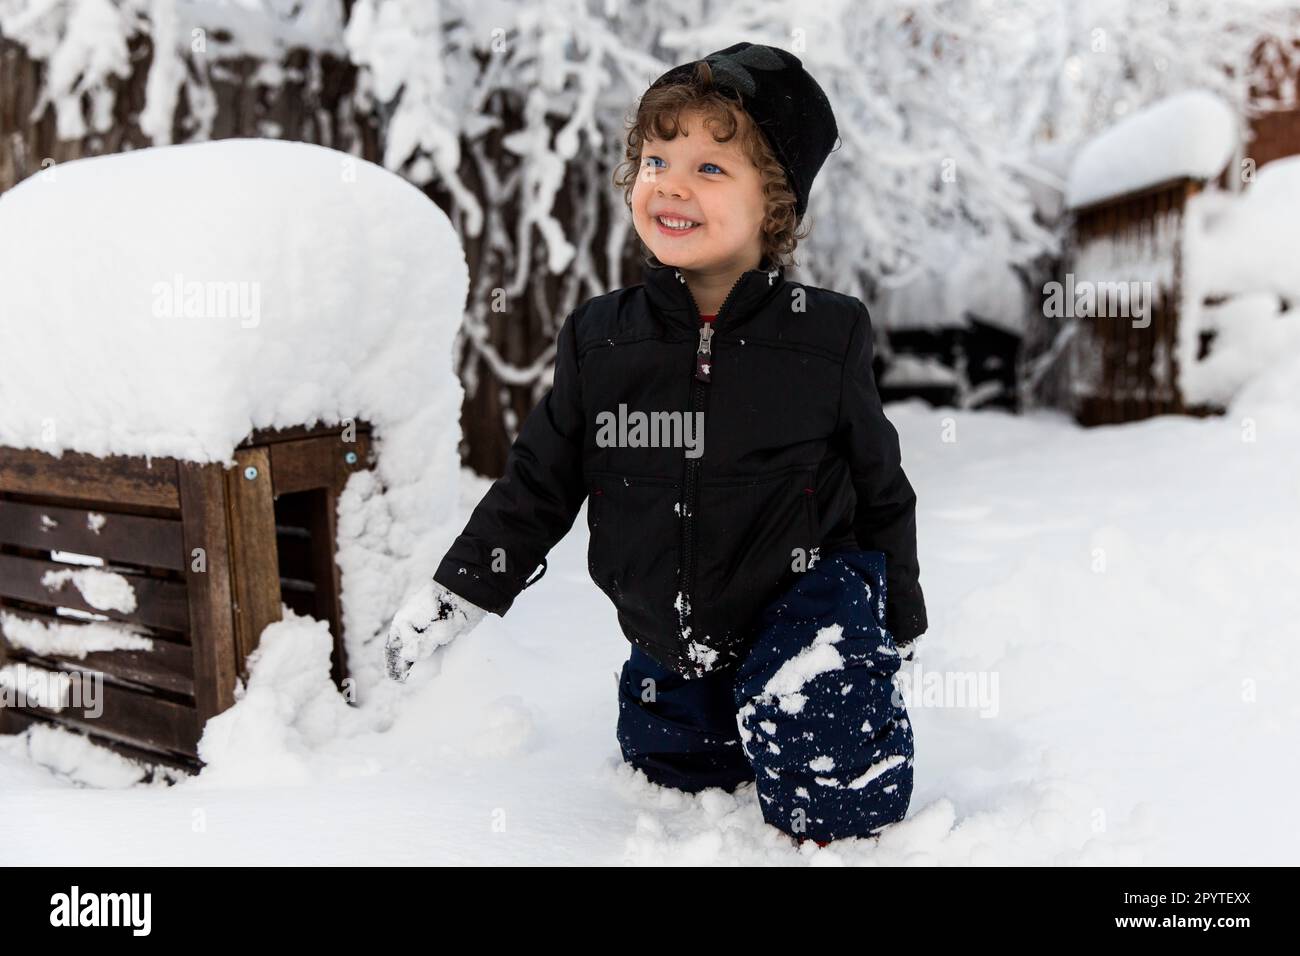 Young child outside on snowy day Stock Photo